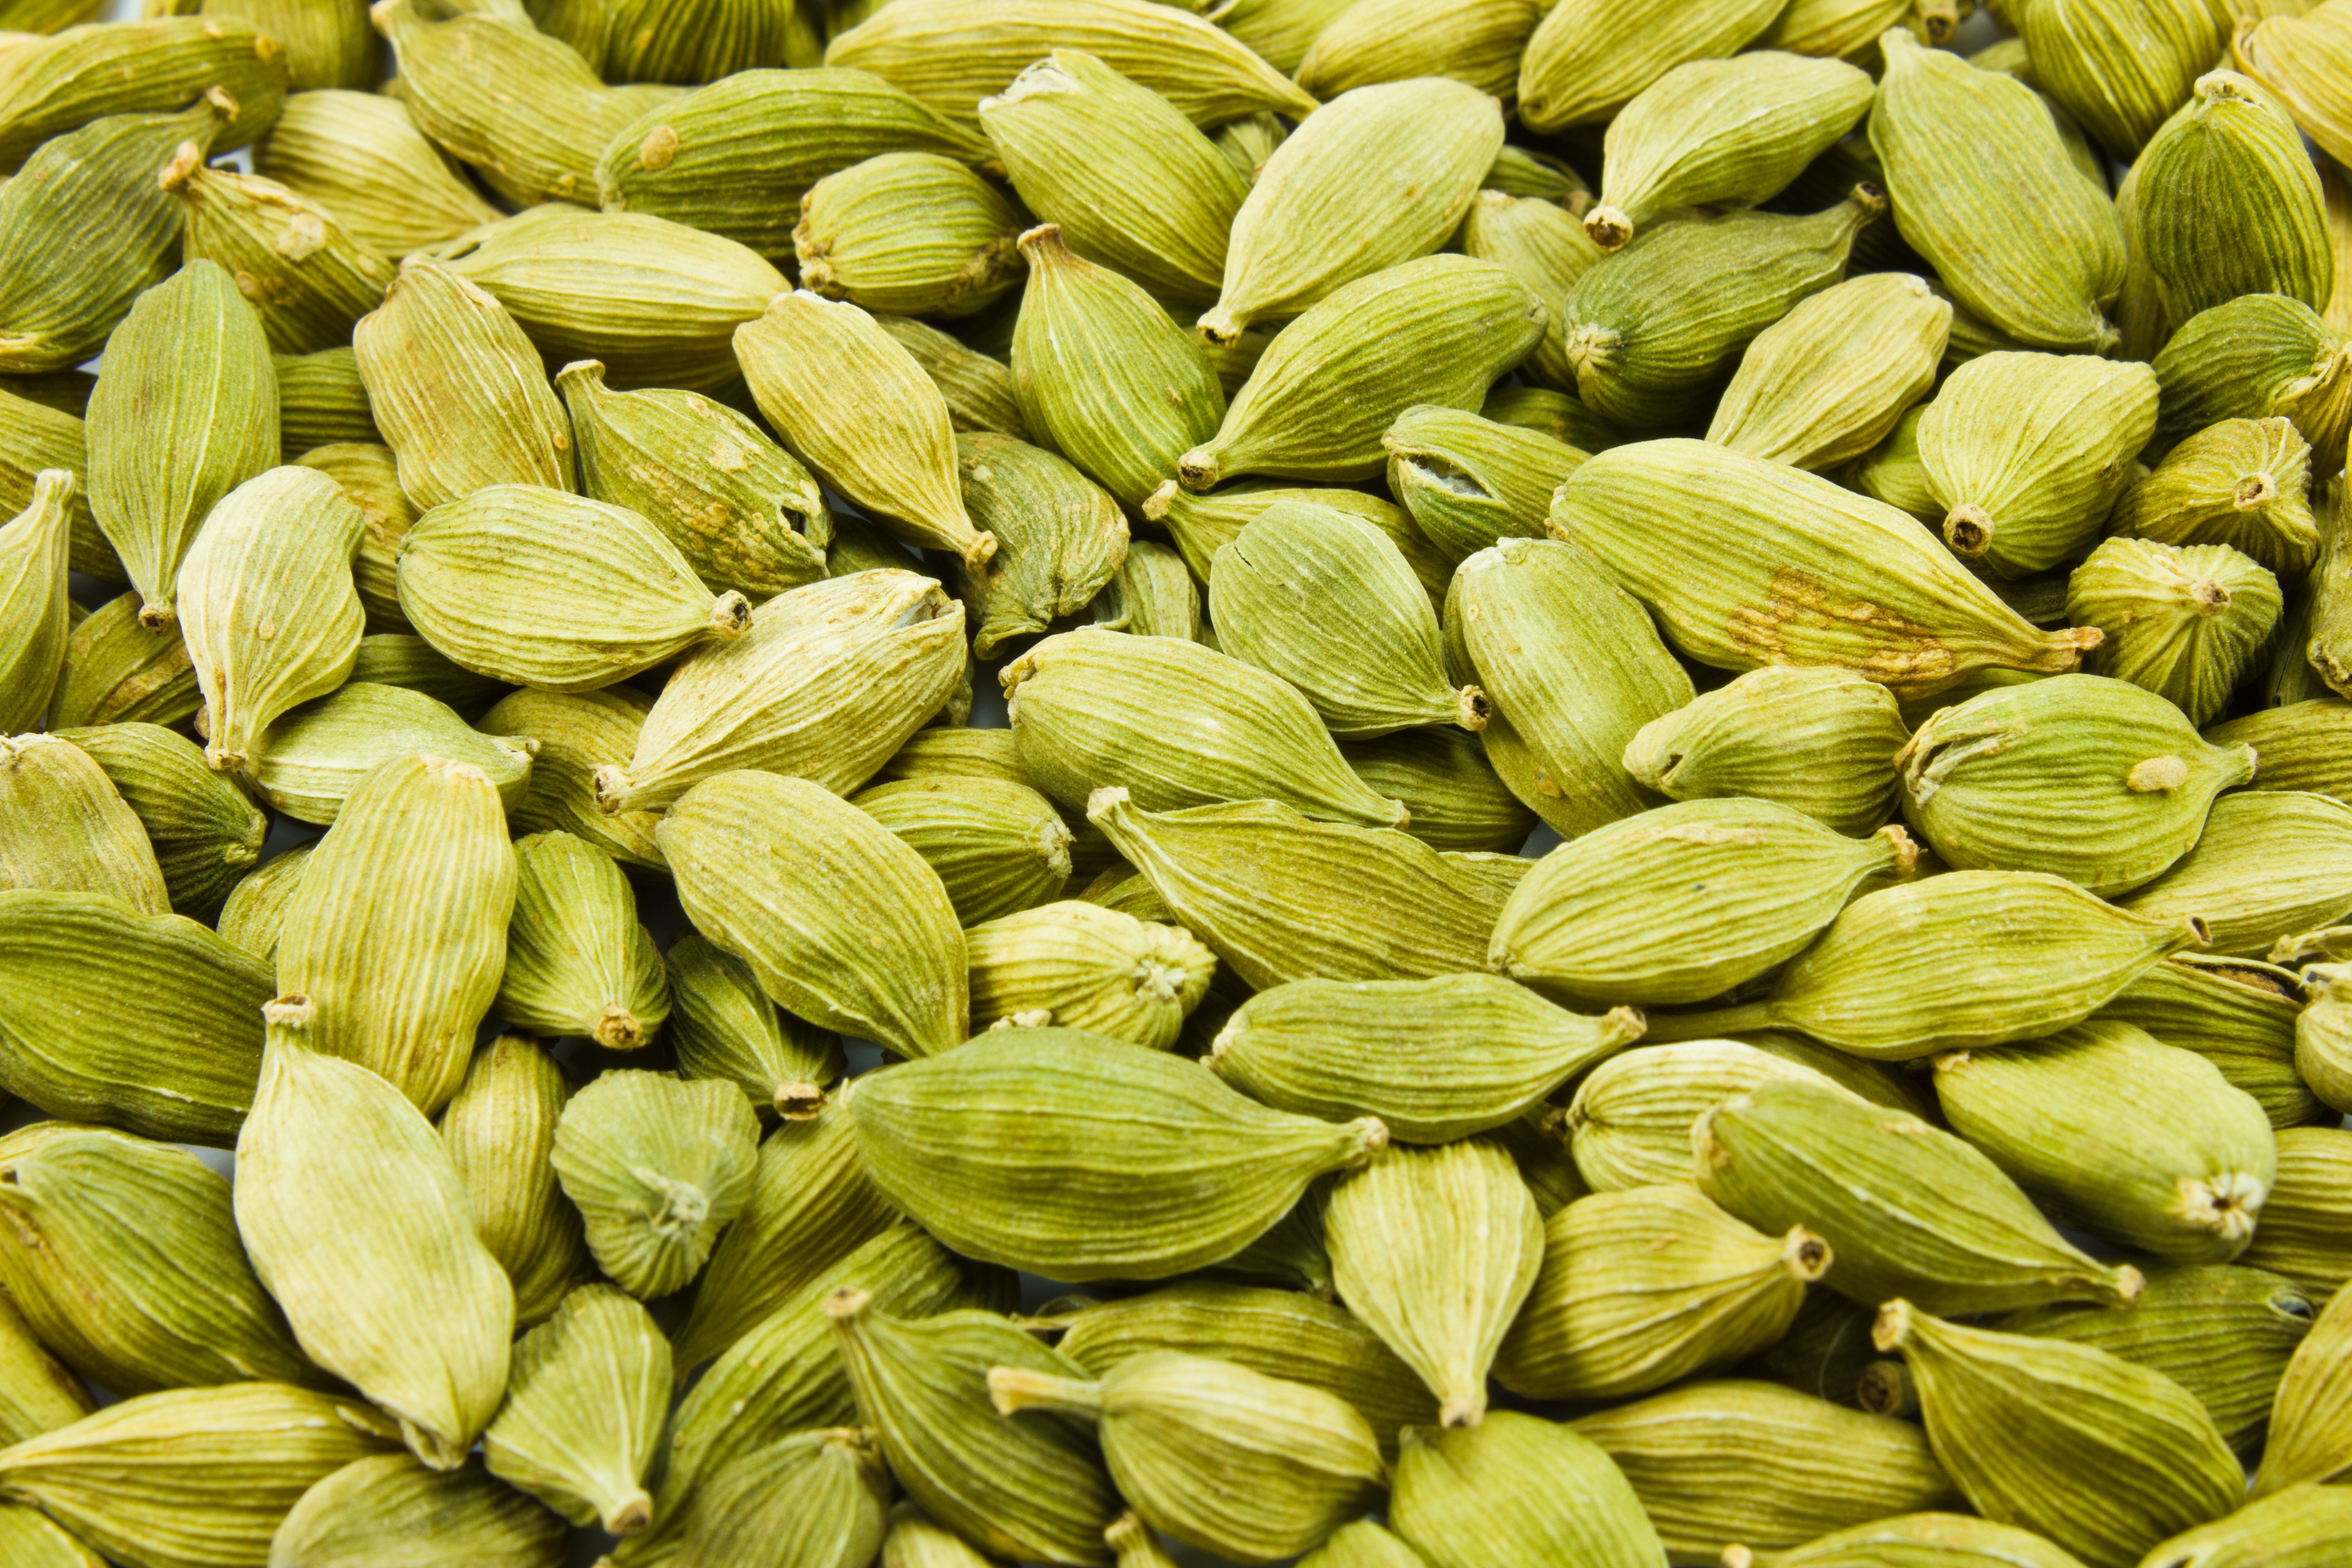 Cardamom Oil, Cardamom Oil Supplier, Cardamom Oil Manufacturer, SCFE Co2 Extract Cardamom Oil Exporter